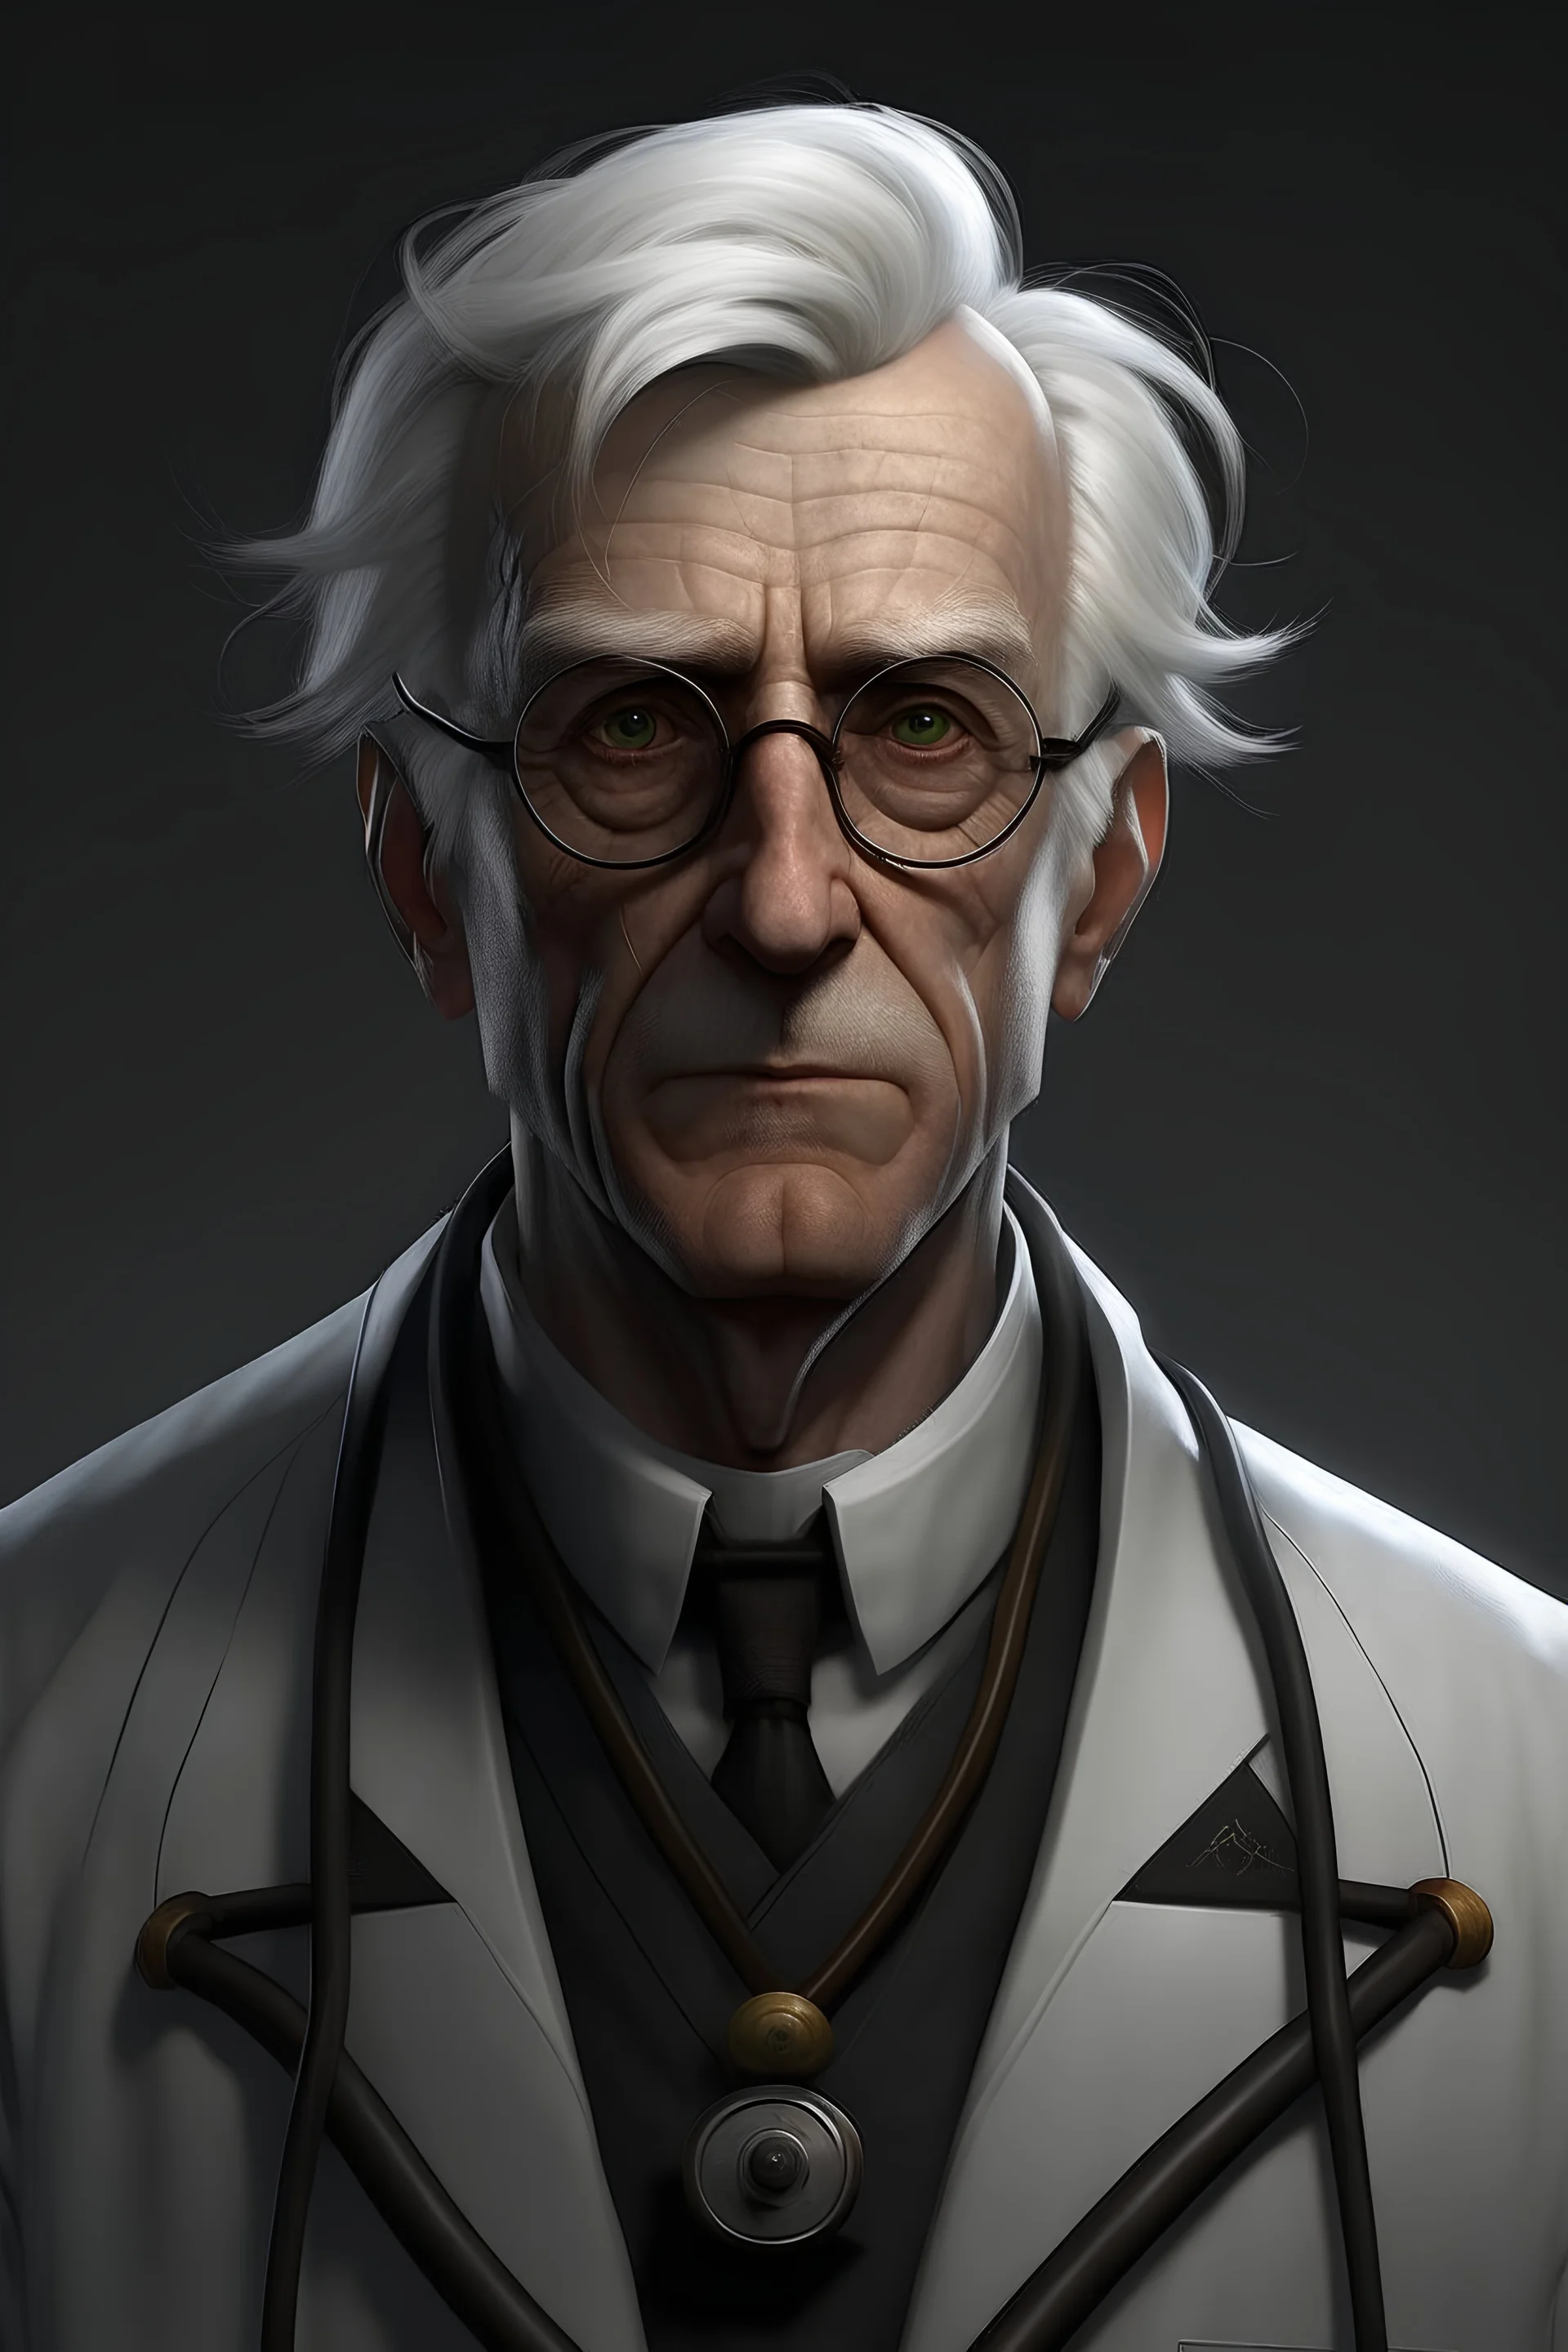 A crazy submarine doctor, young german with white hair. realistic grimdark.